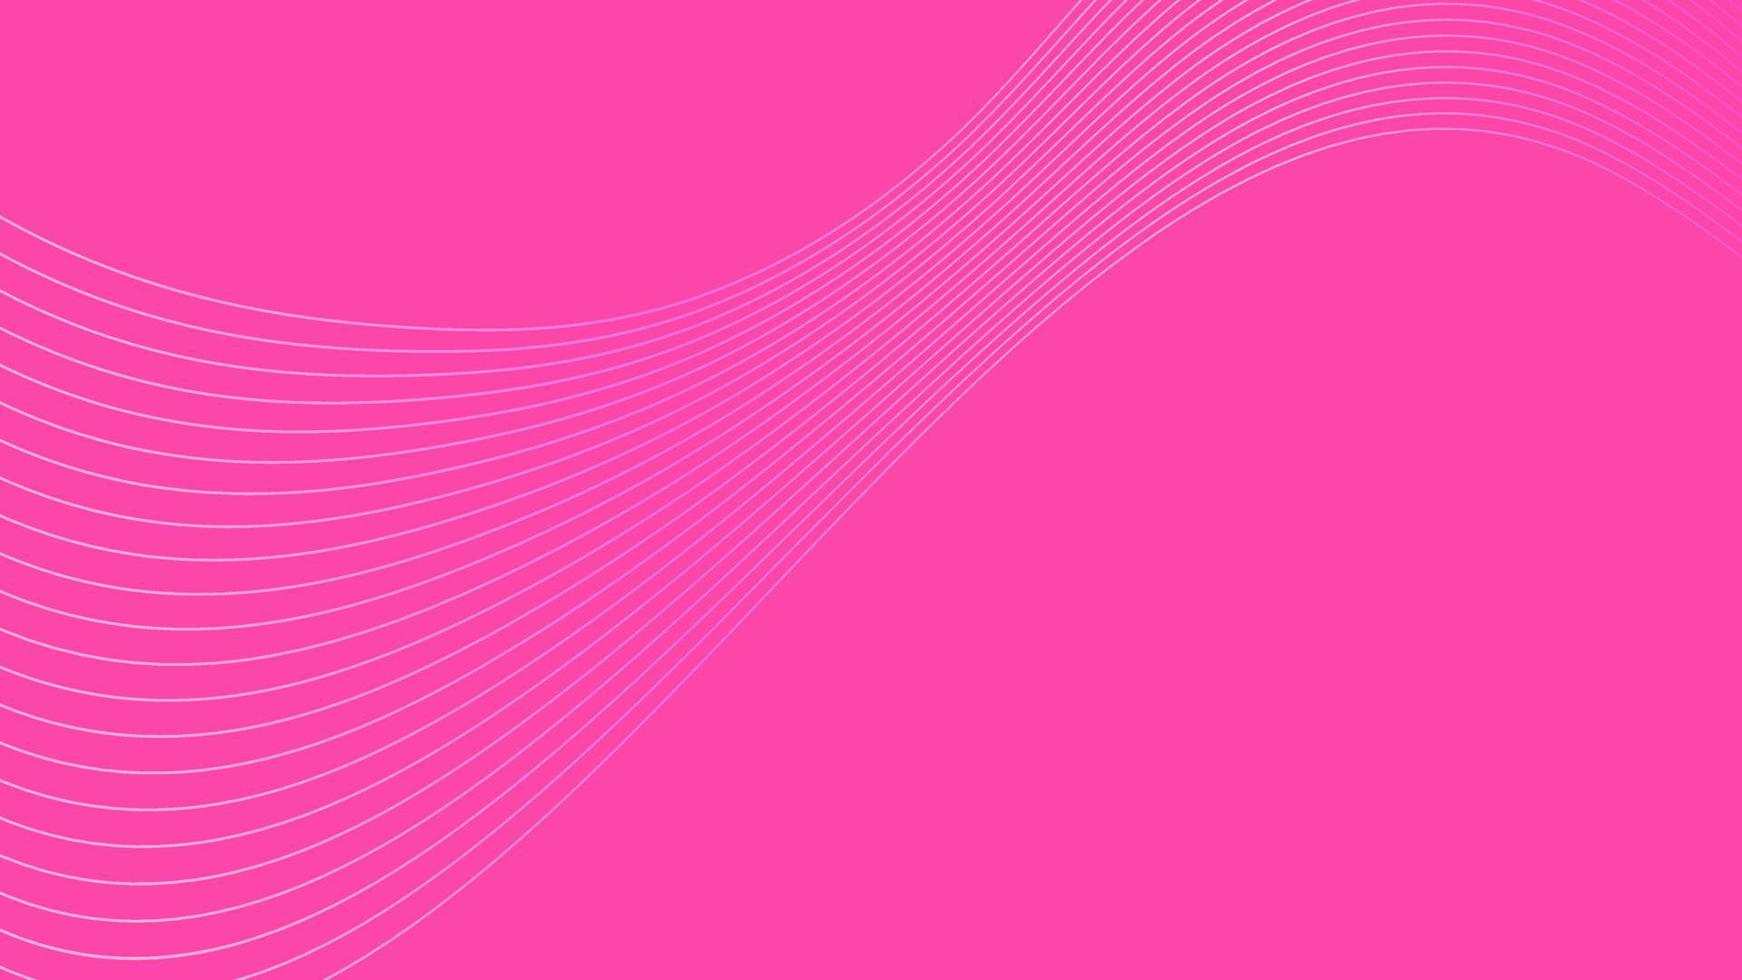 Abstract pink geometric minimalism shape vector background